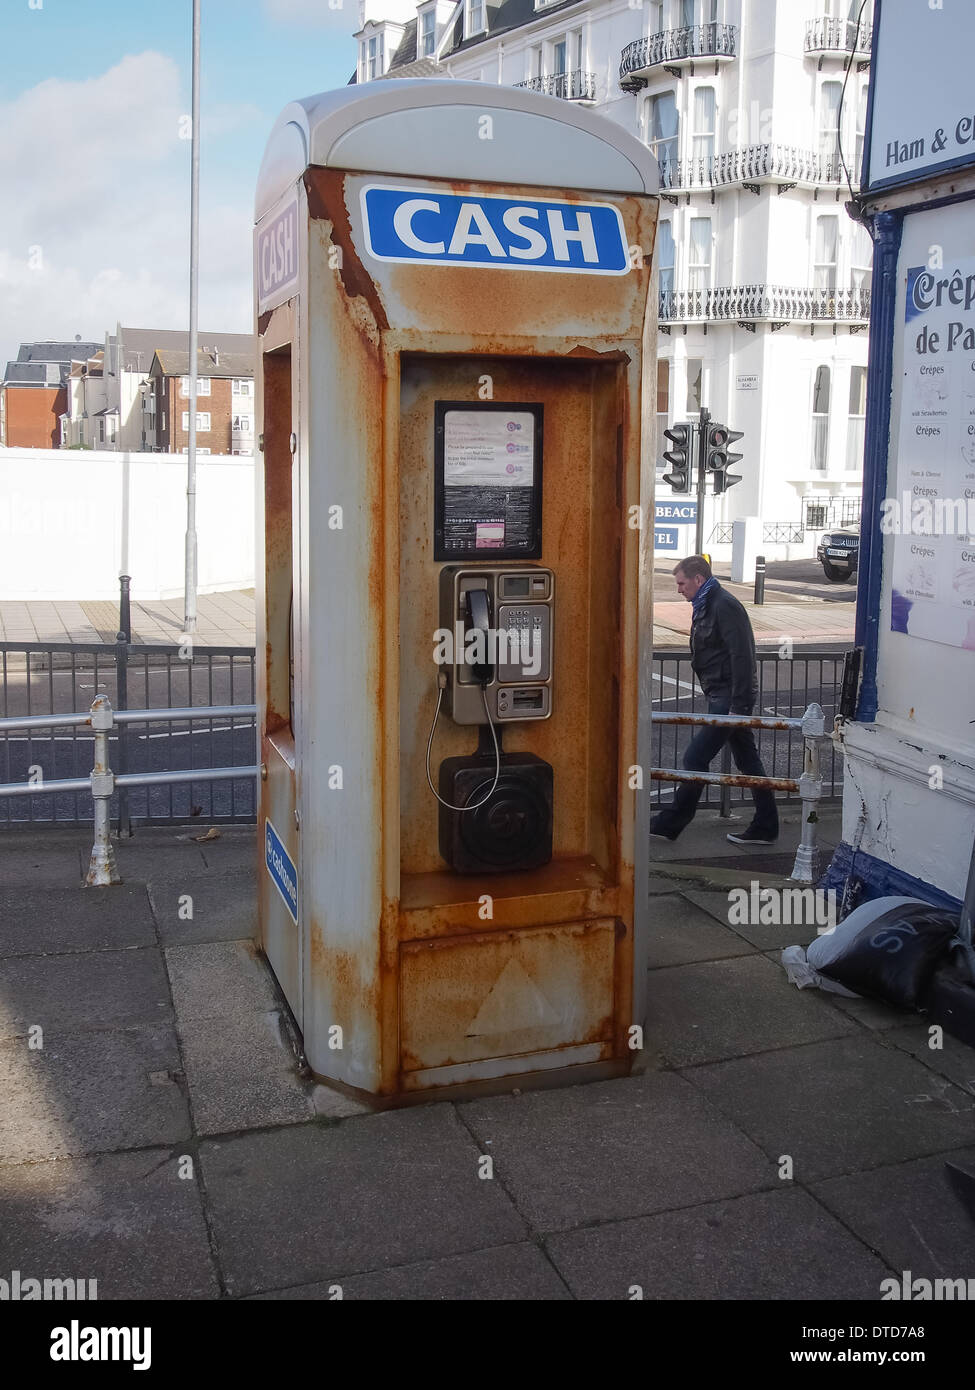 Portsmouth, Hampshire, England 15th february 2014. After weeks of rain and wind a public telephone and ATM stand battered and rusting in front of South Parade Pier which has been damaged by the severe weather. Credit:  simon evans/Alamy Live News Stock Photo